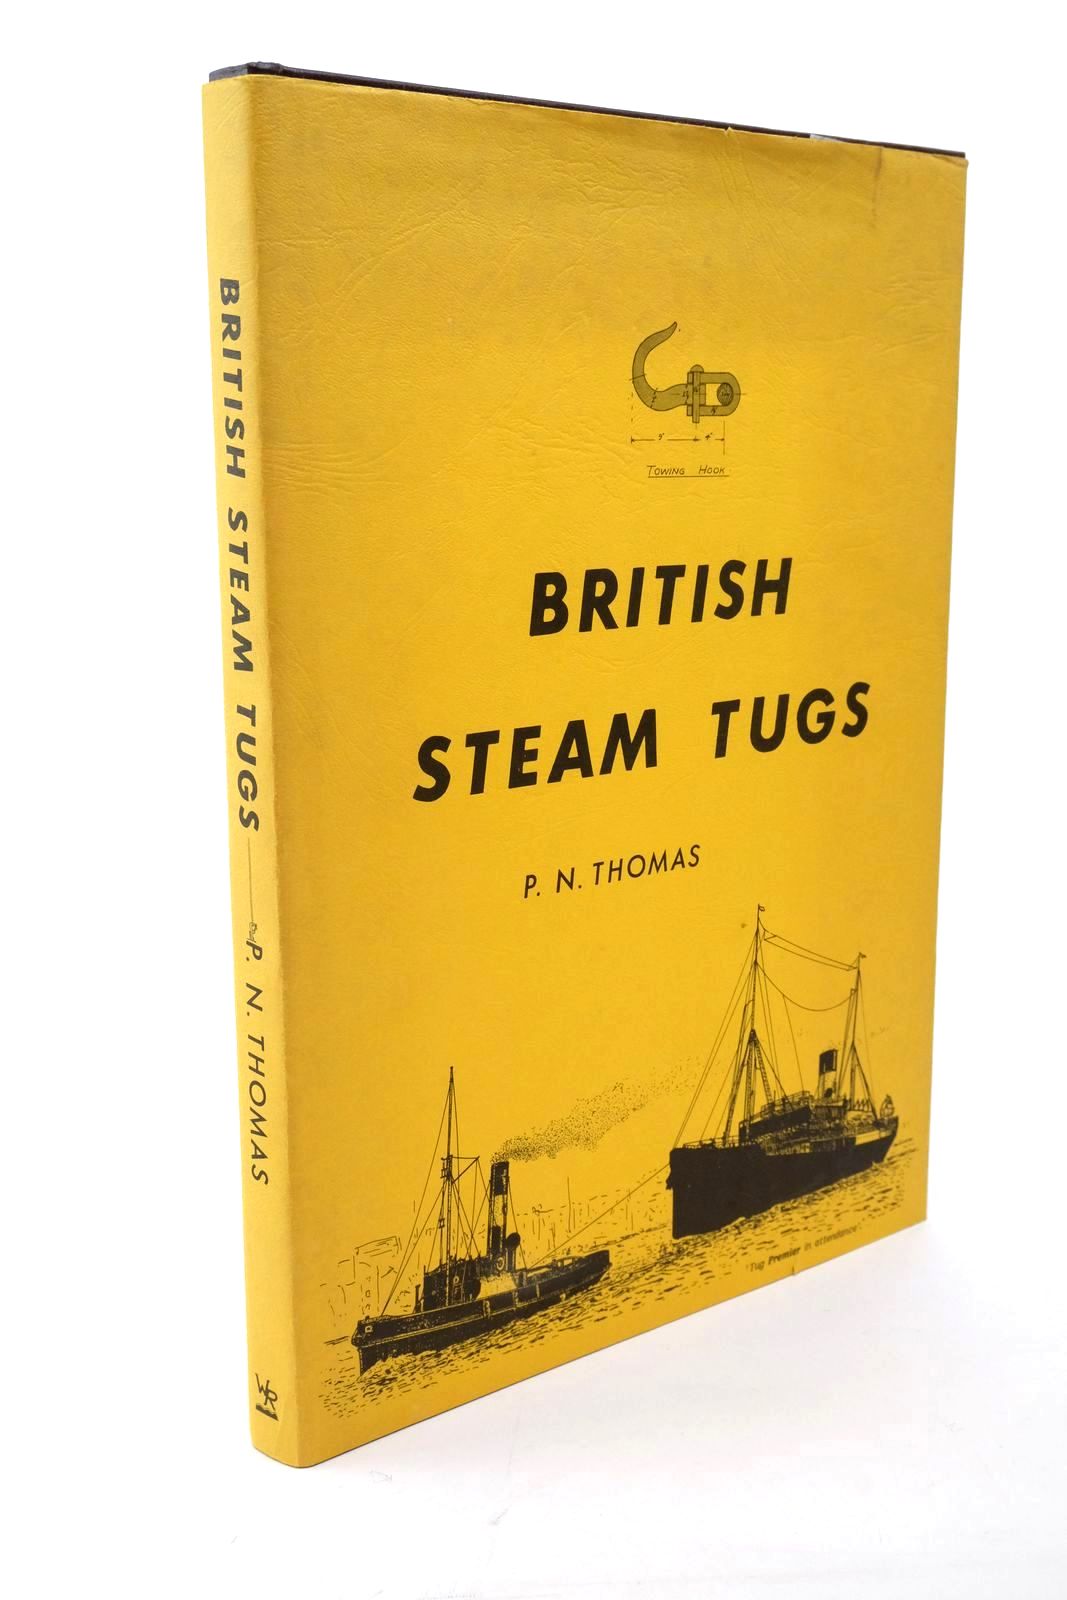 Photo of BRITISH STEAM TUGS written by Thomas, P.N. illustrated by Waine, C.V. published by Waine Research Publications (STOCK CODE: 1322466)  for sale by Stella & Rose's Books